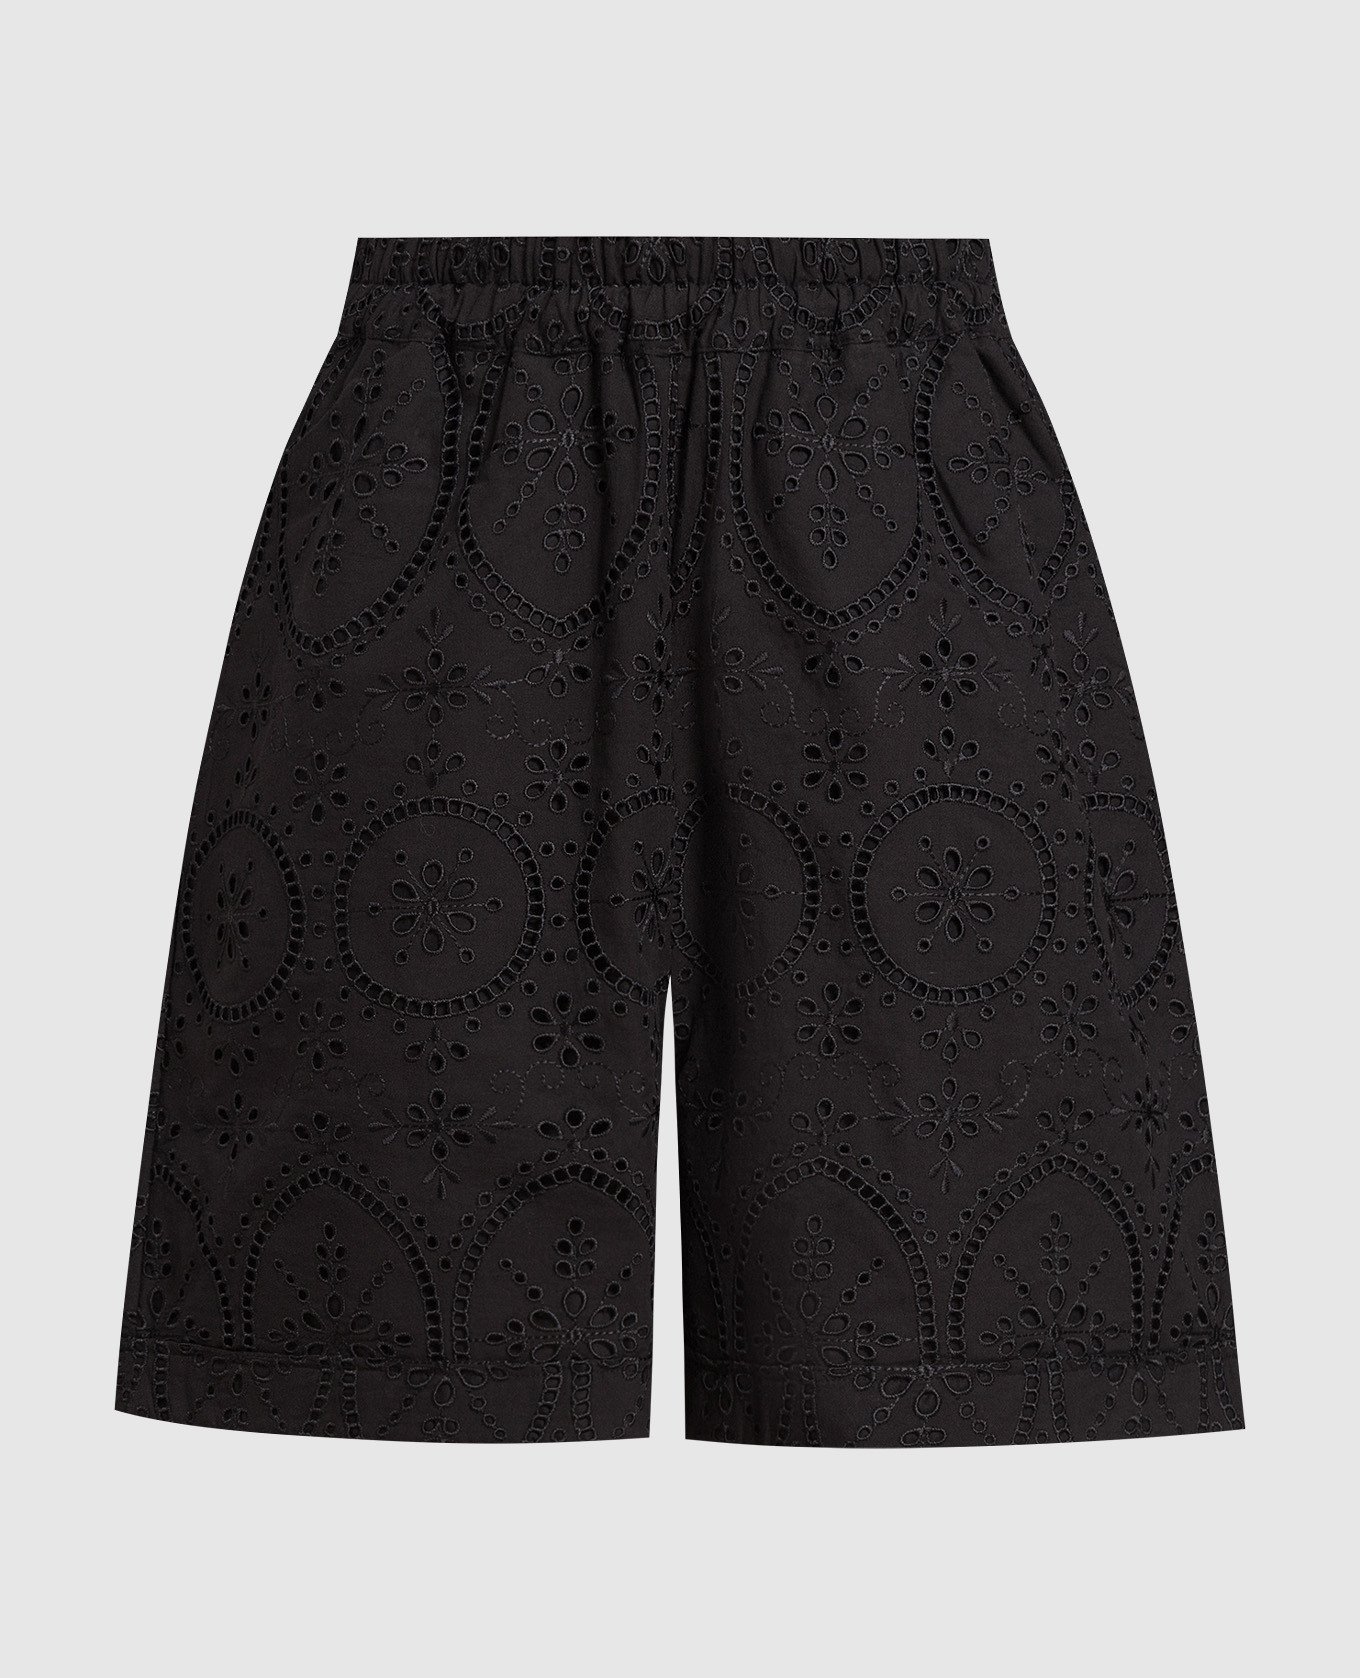 Black Lyo shorts with broderie embroidery